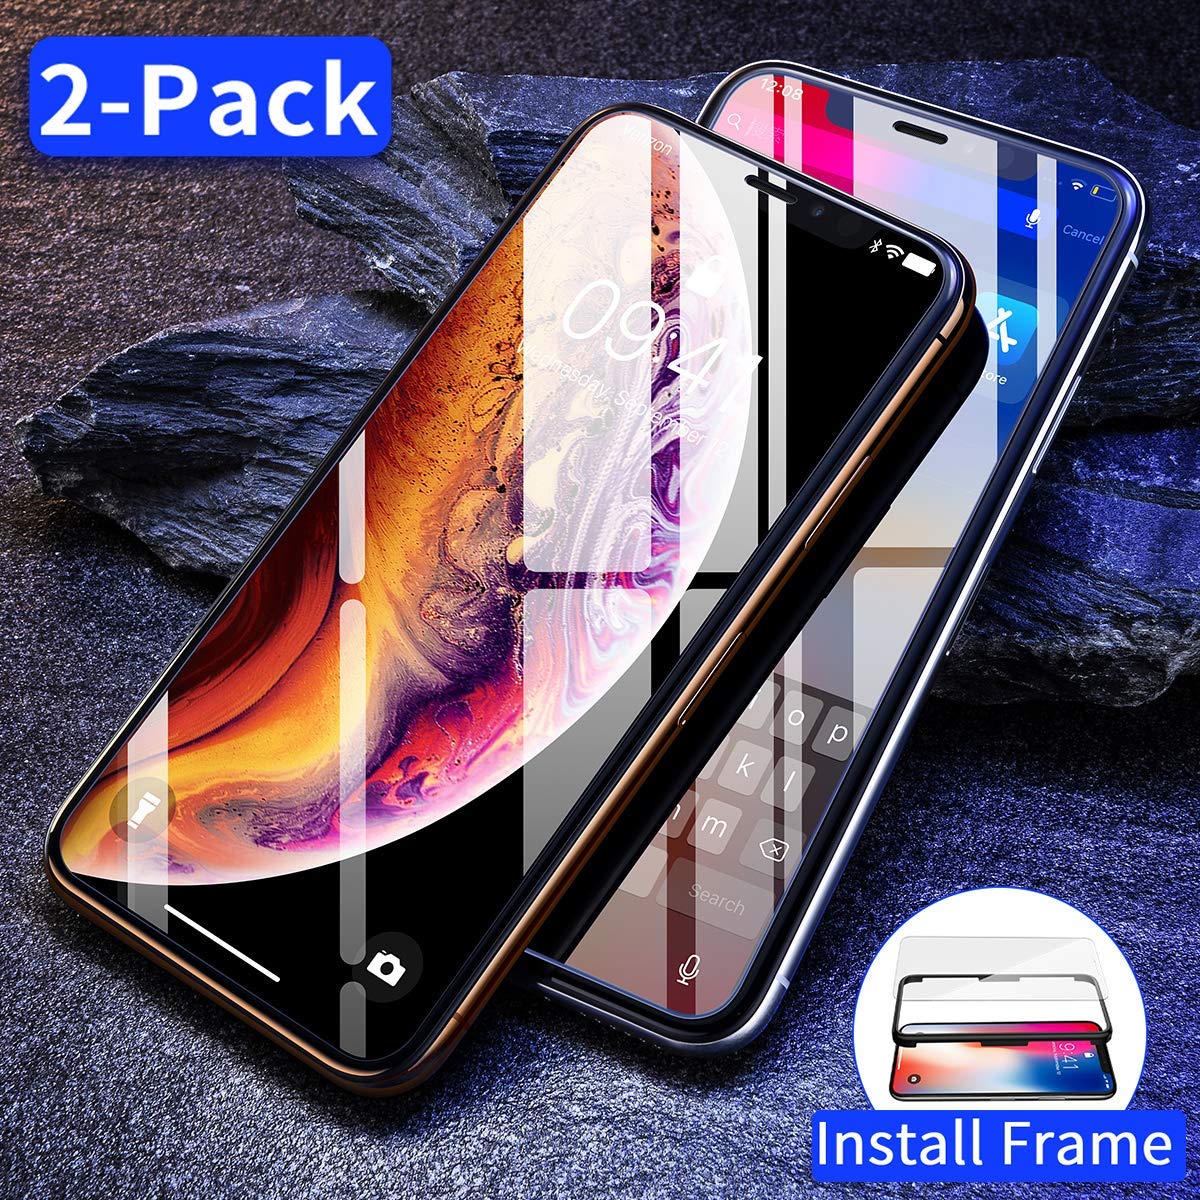 Ainope Screen Protector for iPhone X, Screen Protector for iPhone Xs